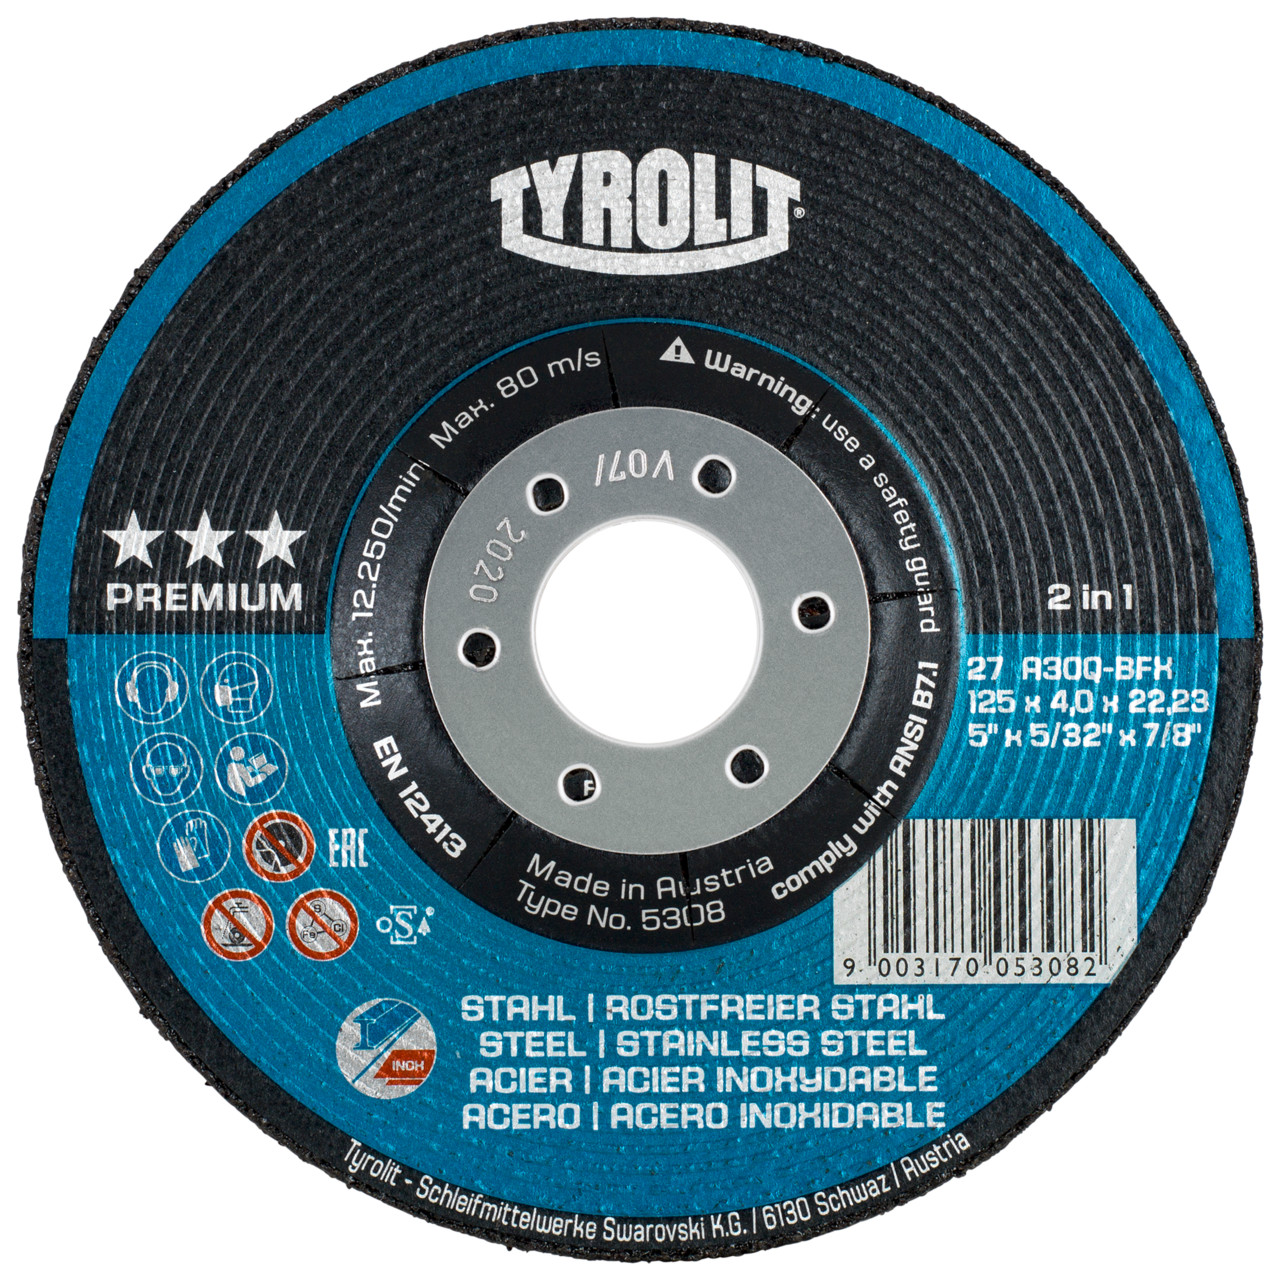 Tyrolit Roughing disc DxUxH 178x4x22.23 2in1 for steel and stainless steel, shape: 27 - offset version, Art. 5349